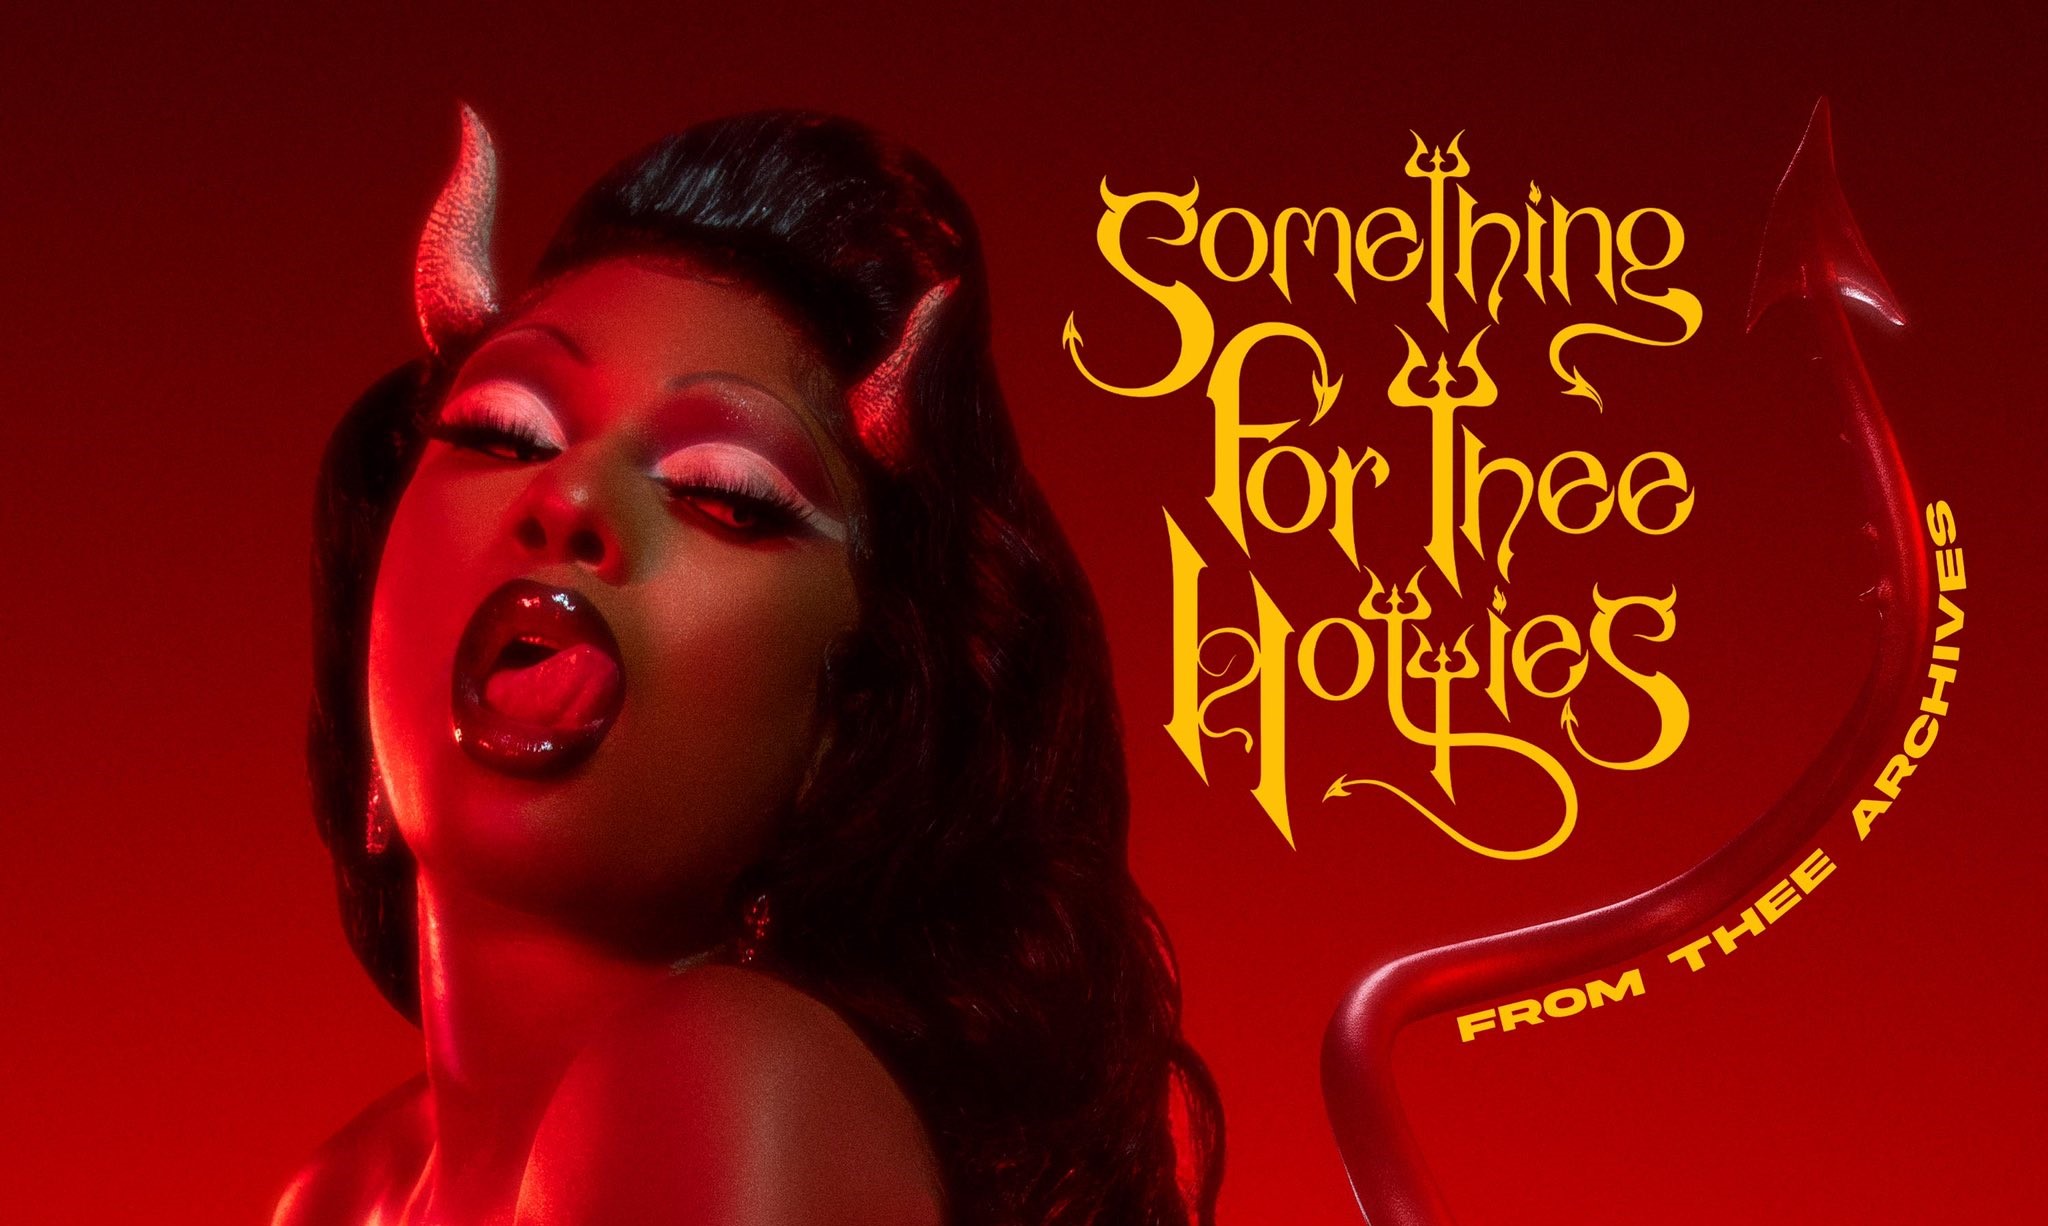 megan thee stallion,something for thee hotties,freestyles,new song,stream,m...